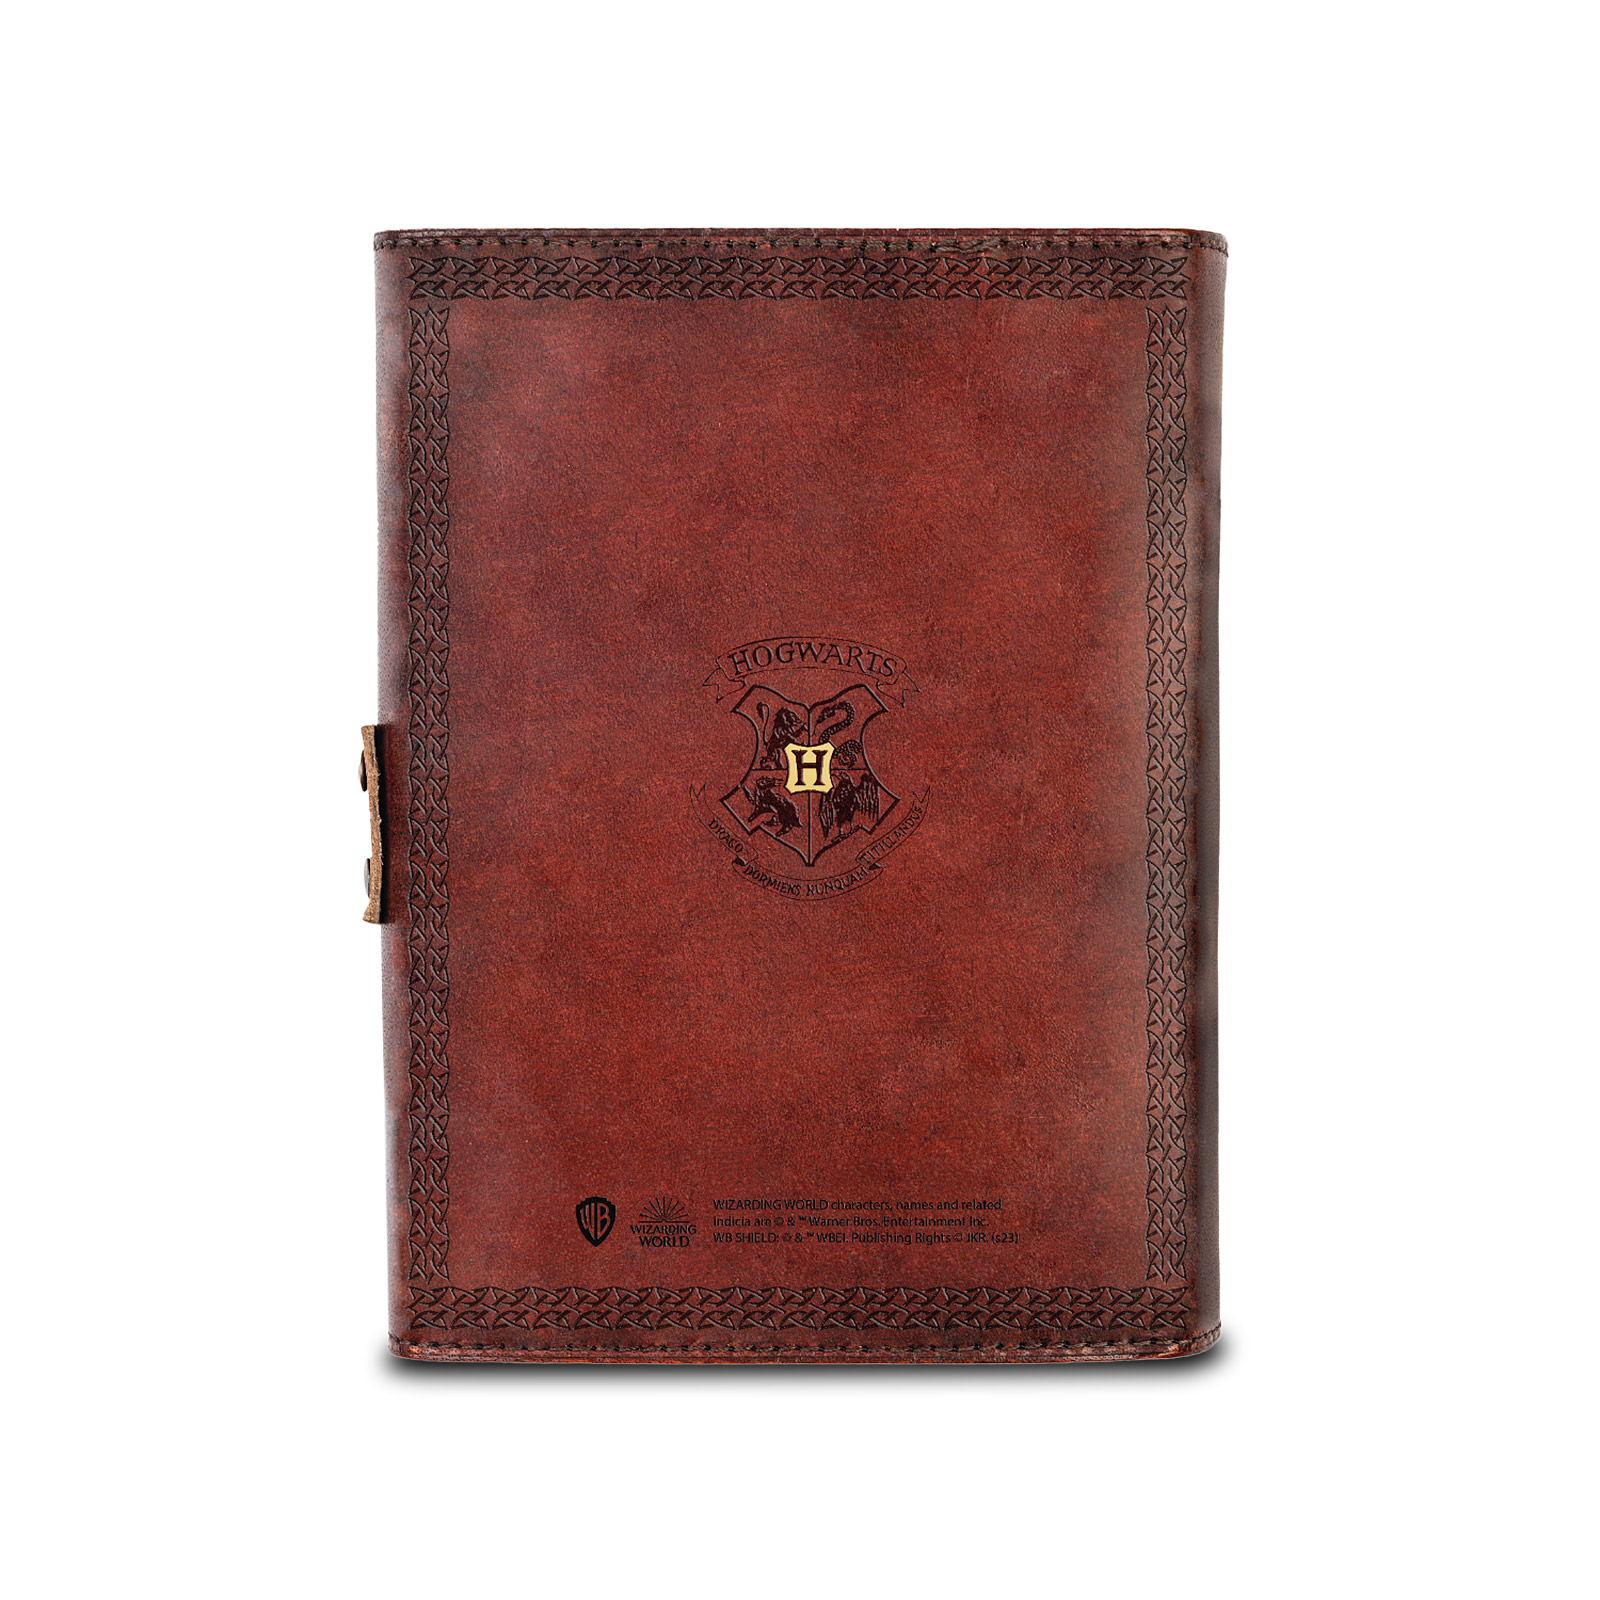 Harry Potter - The Golden Snitch Notebook